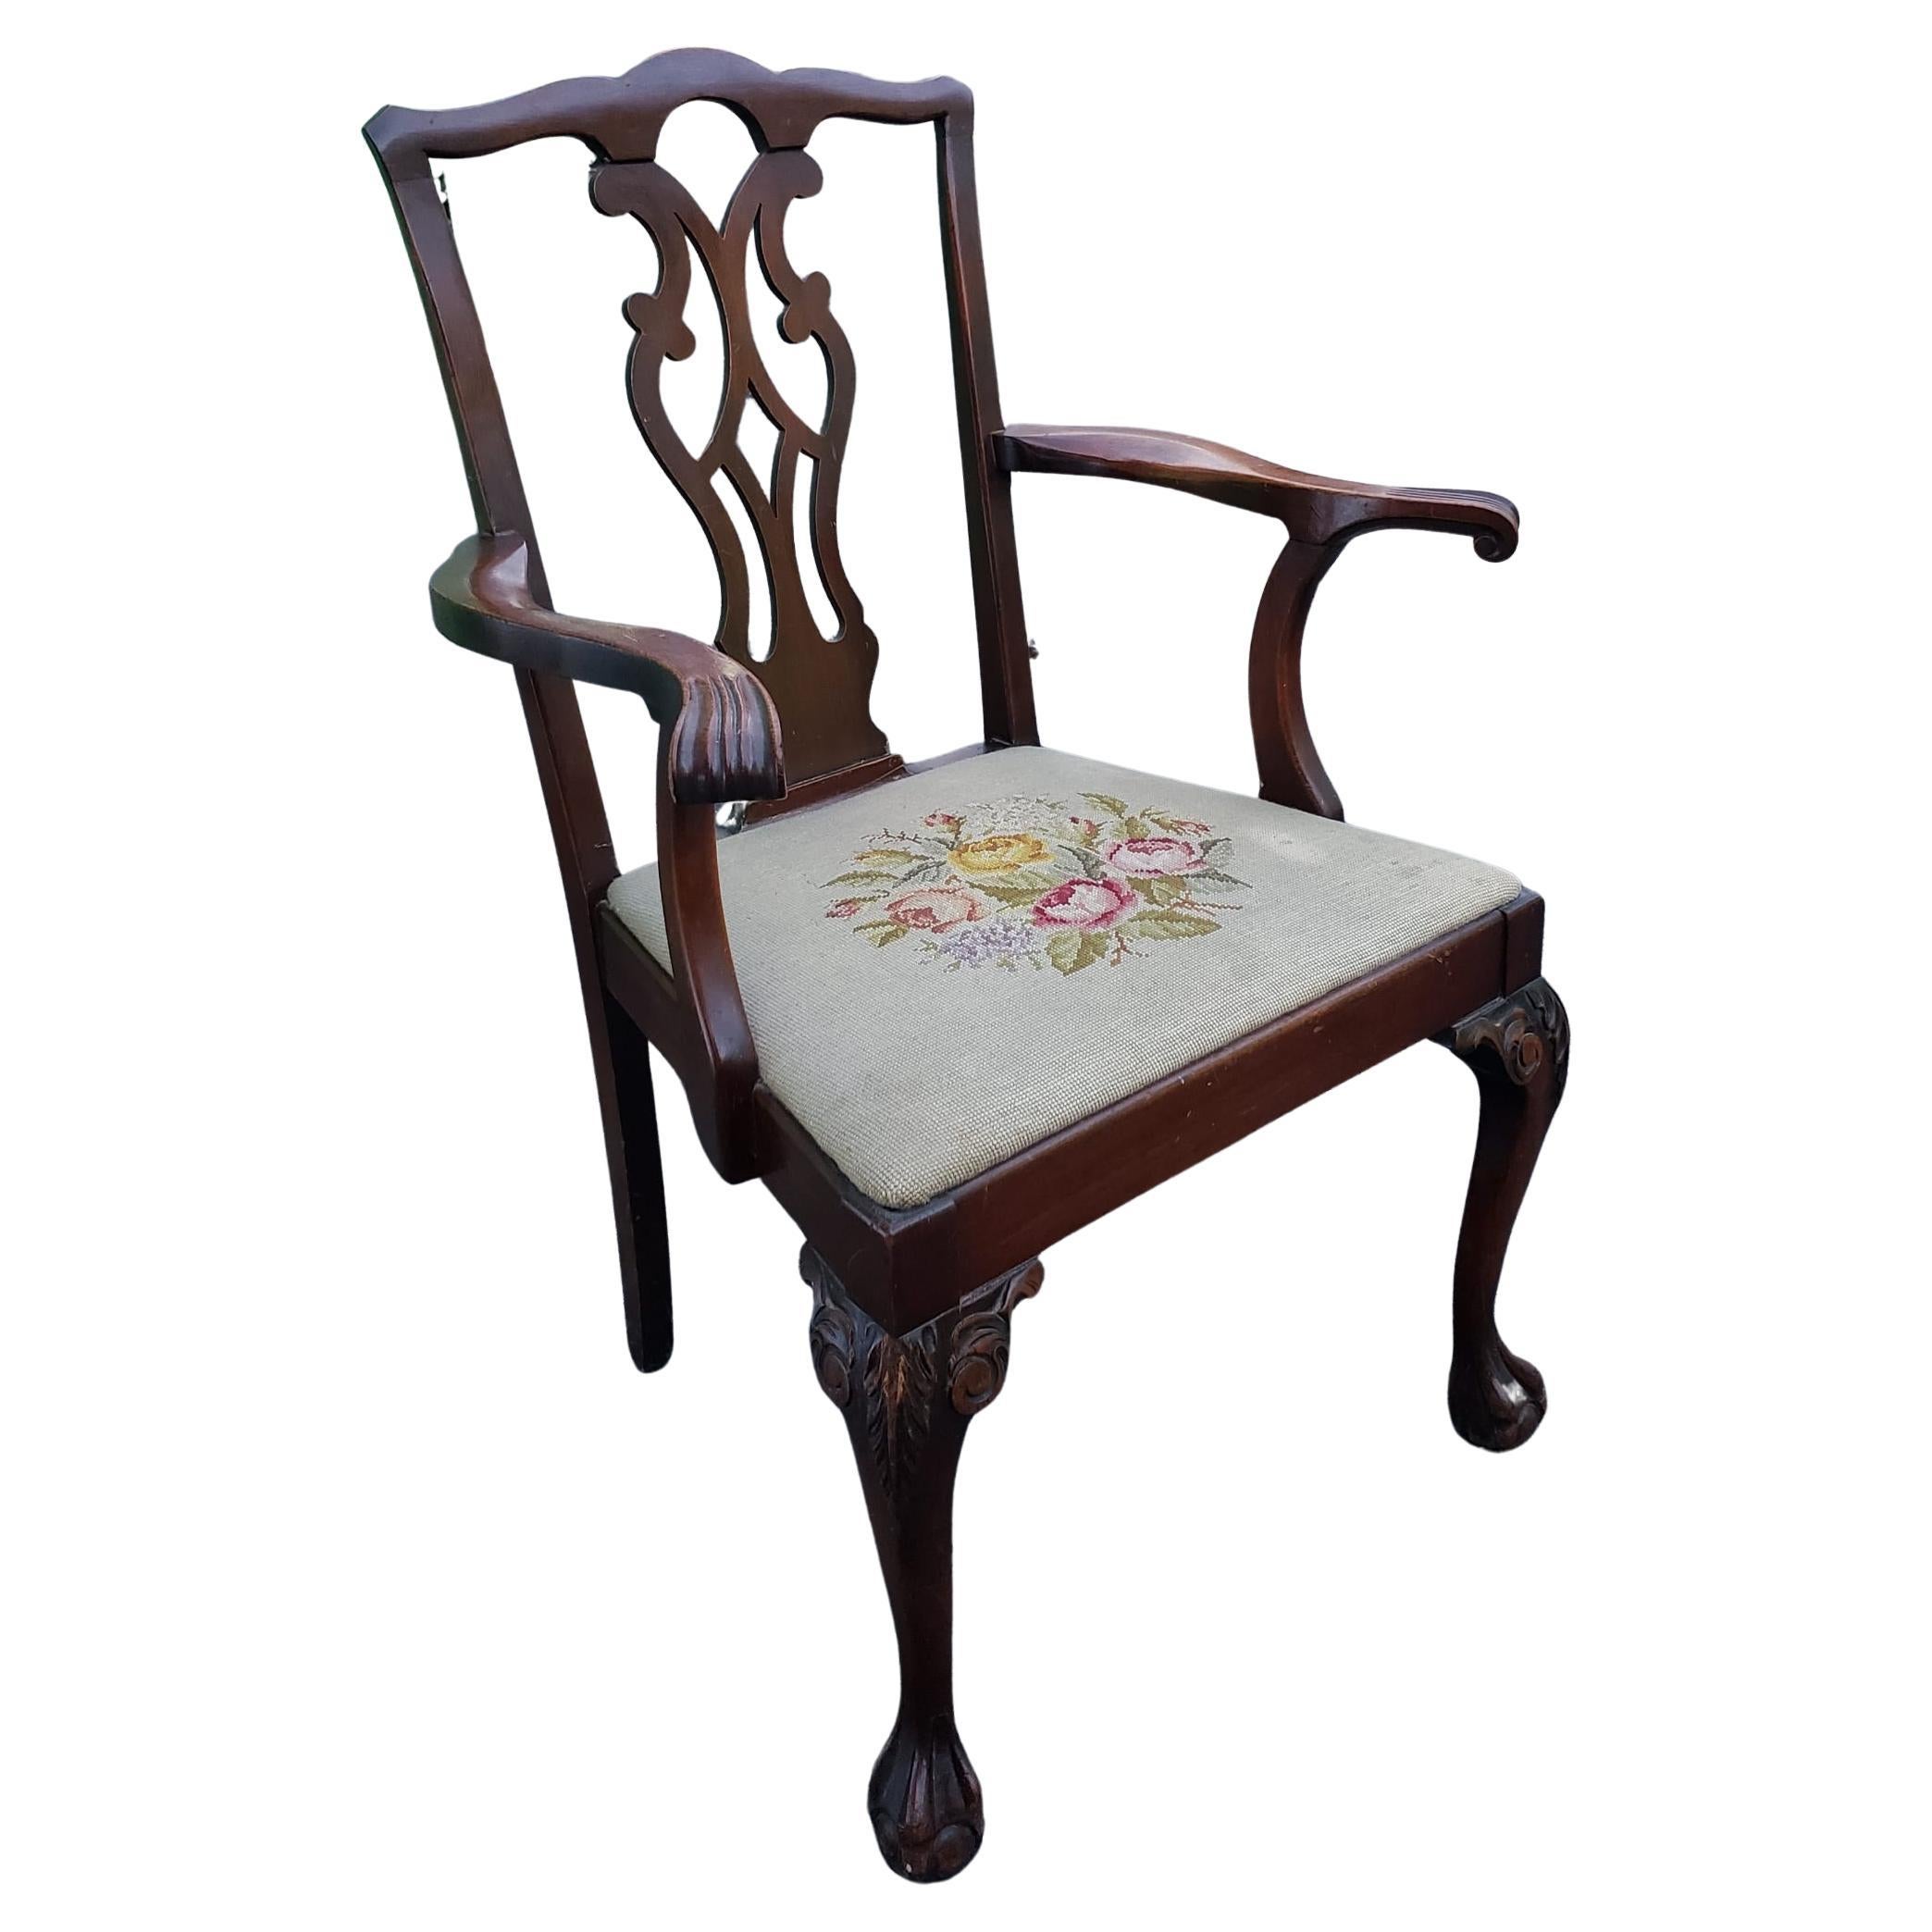 Late 19th Century Chippendale Mahogany Needlepoint Upholstered Armchair In Good Condition For Sale In Germantown, MD